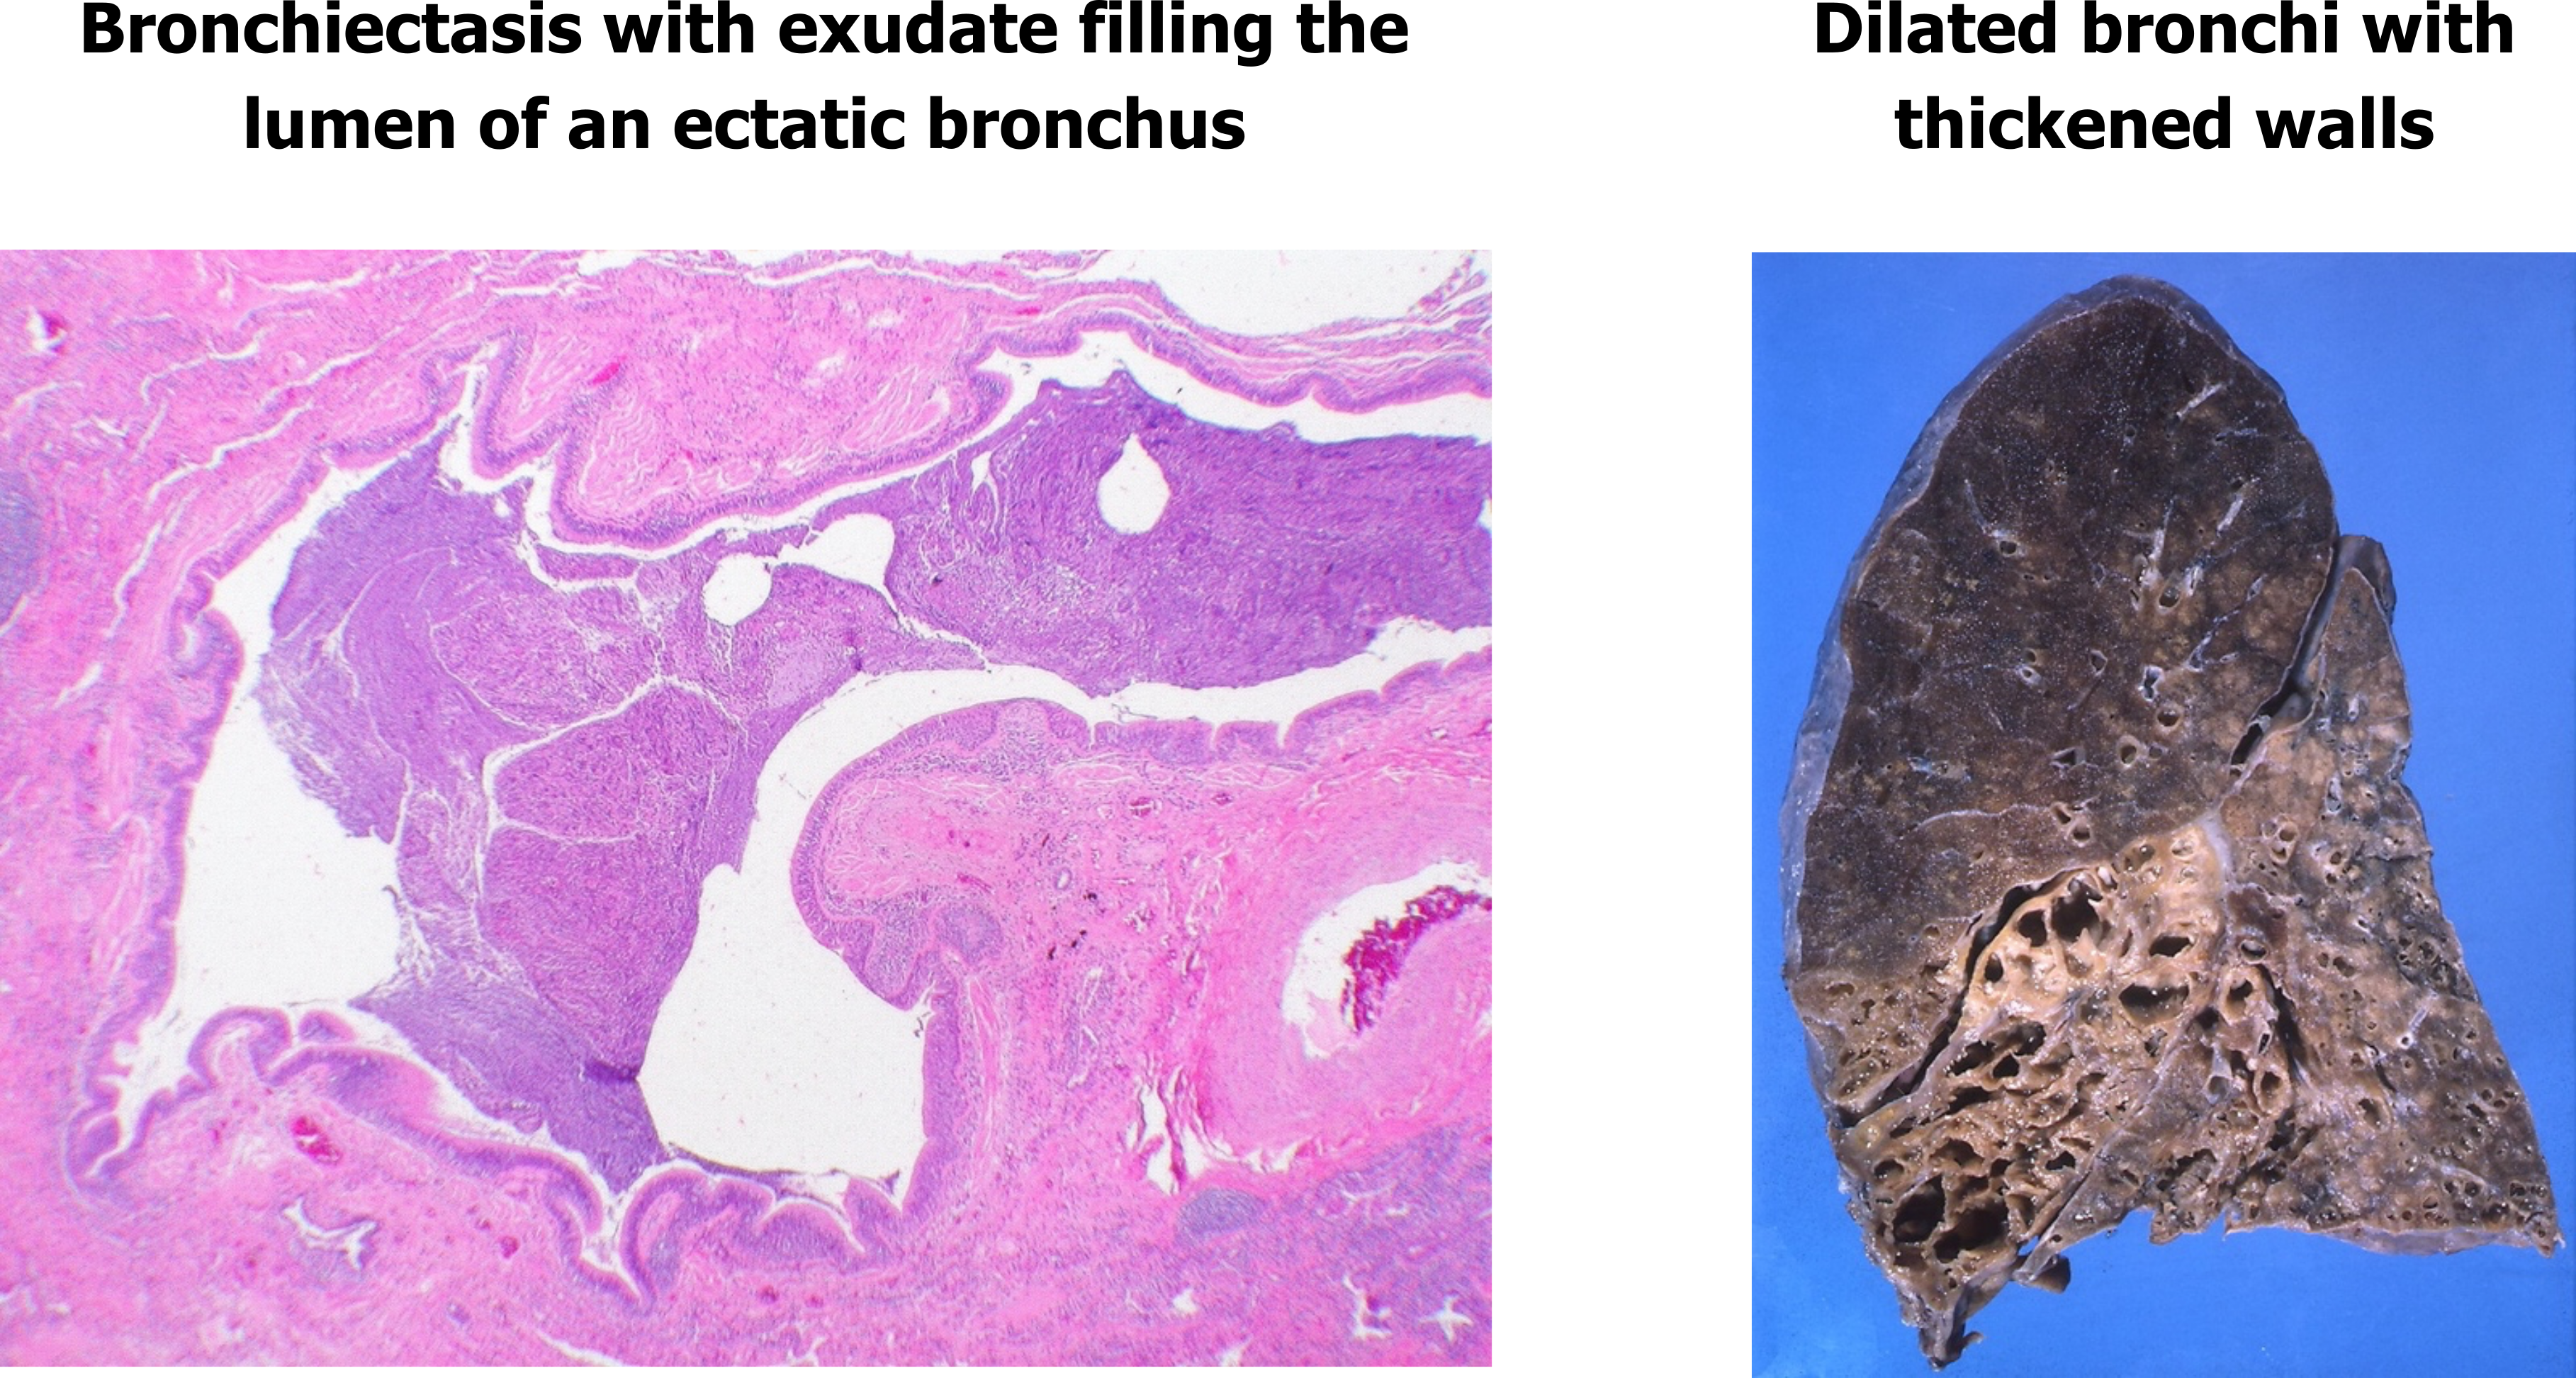 Two images show the pathology of bronchiectasis. To the left is a histological slide of a a dilated airway, the lumen of the airway is enlarged and filled with a purple stained mass that is exudate. To the right is a gross anatomy image of a coronally sectioned right lung, the lower lobes of the lung show enlarged open spaces within normal more dense lung tissue.